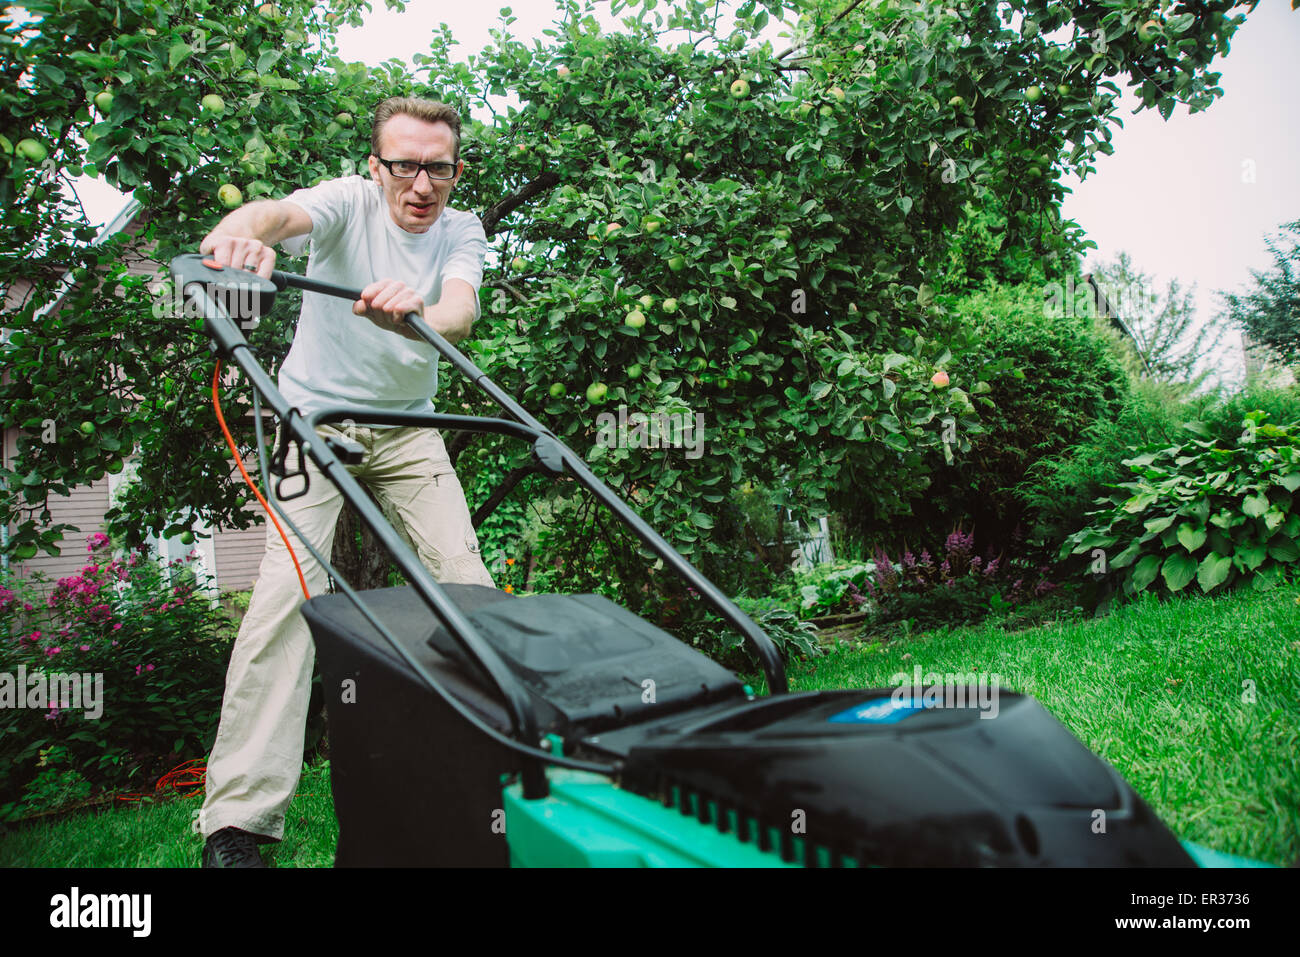 man with lawn mower Stock Photo